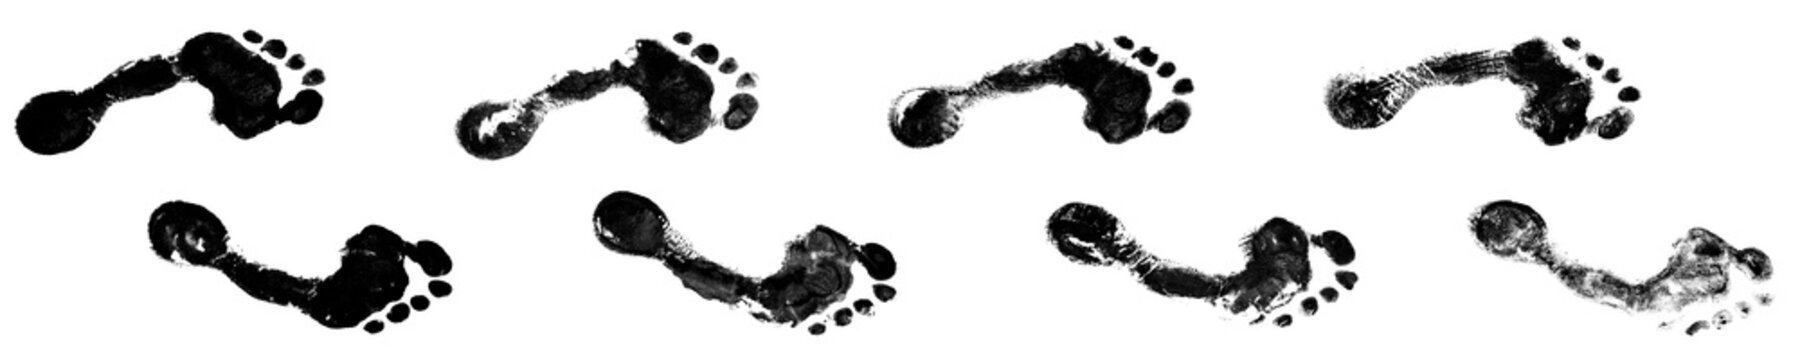 Human black footprints way white background isolated, barefoot person foot print pattern, walking path, footsteps silhouette illustration, bare feet route trail, ink imprint, stamp, mark, sign, symbol